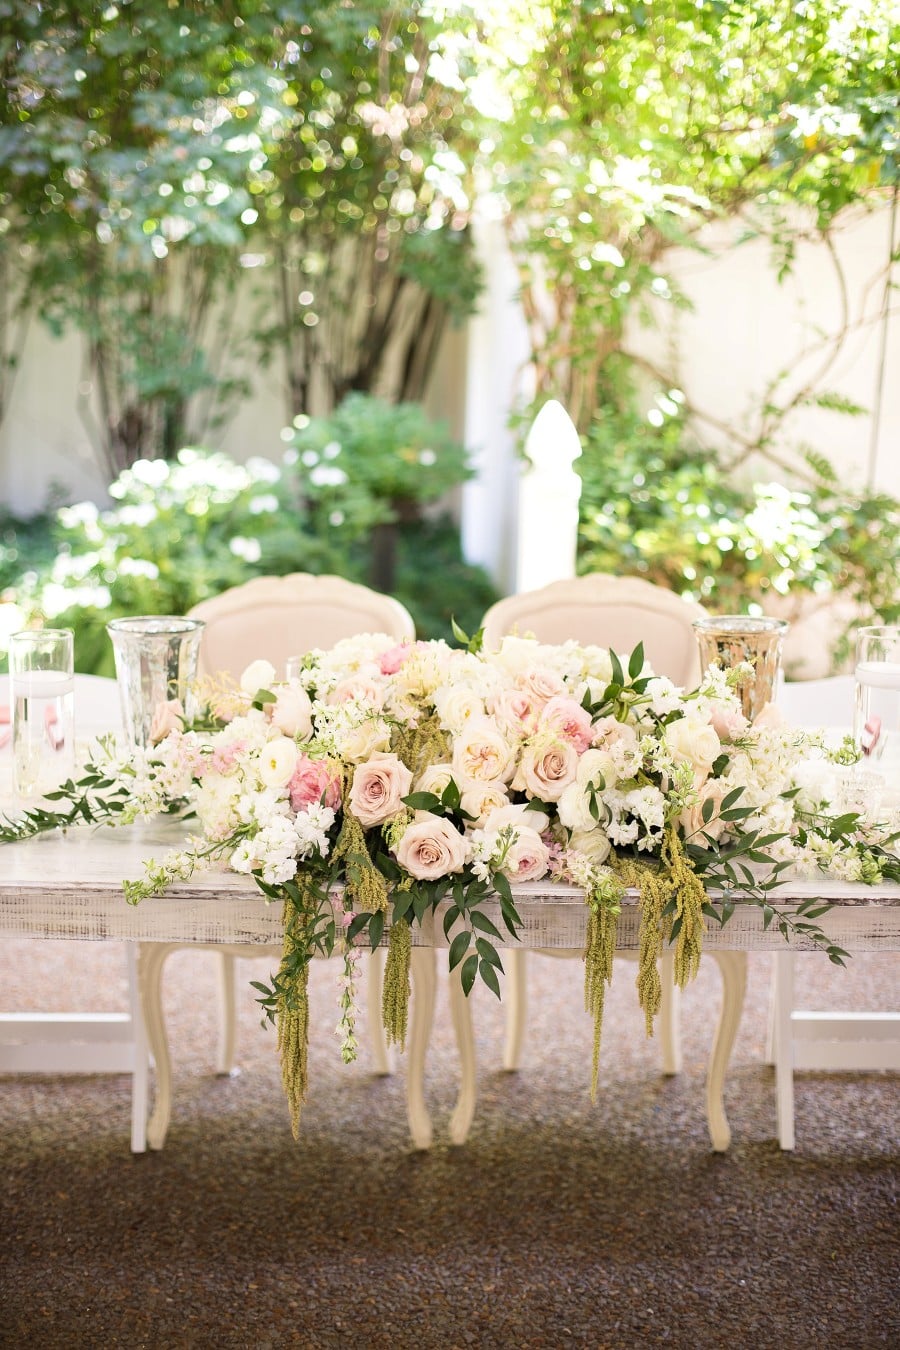 Shabby chic sweetheart table in blush, dusty rose and ivory